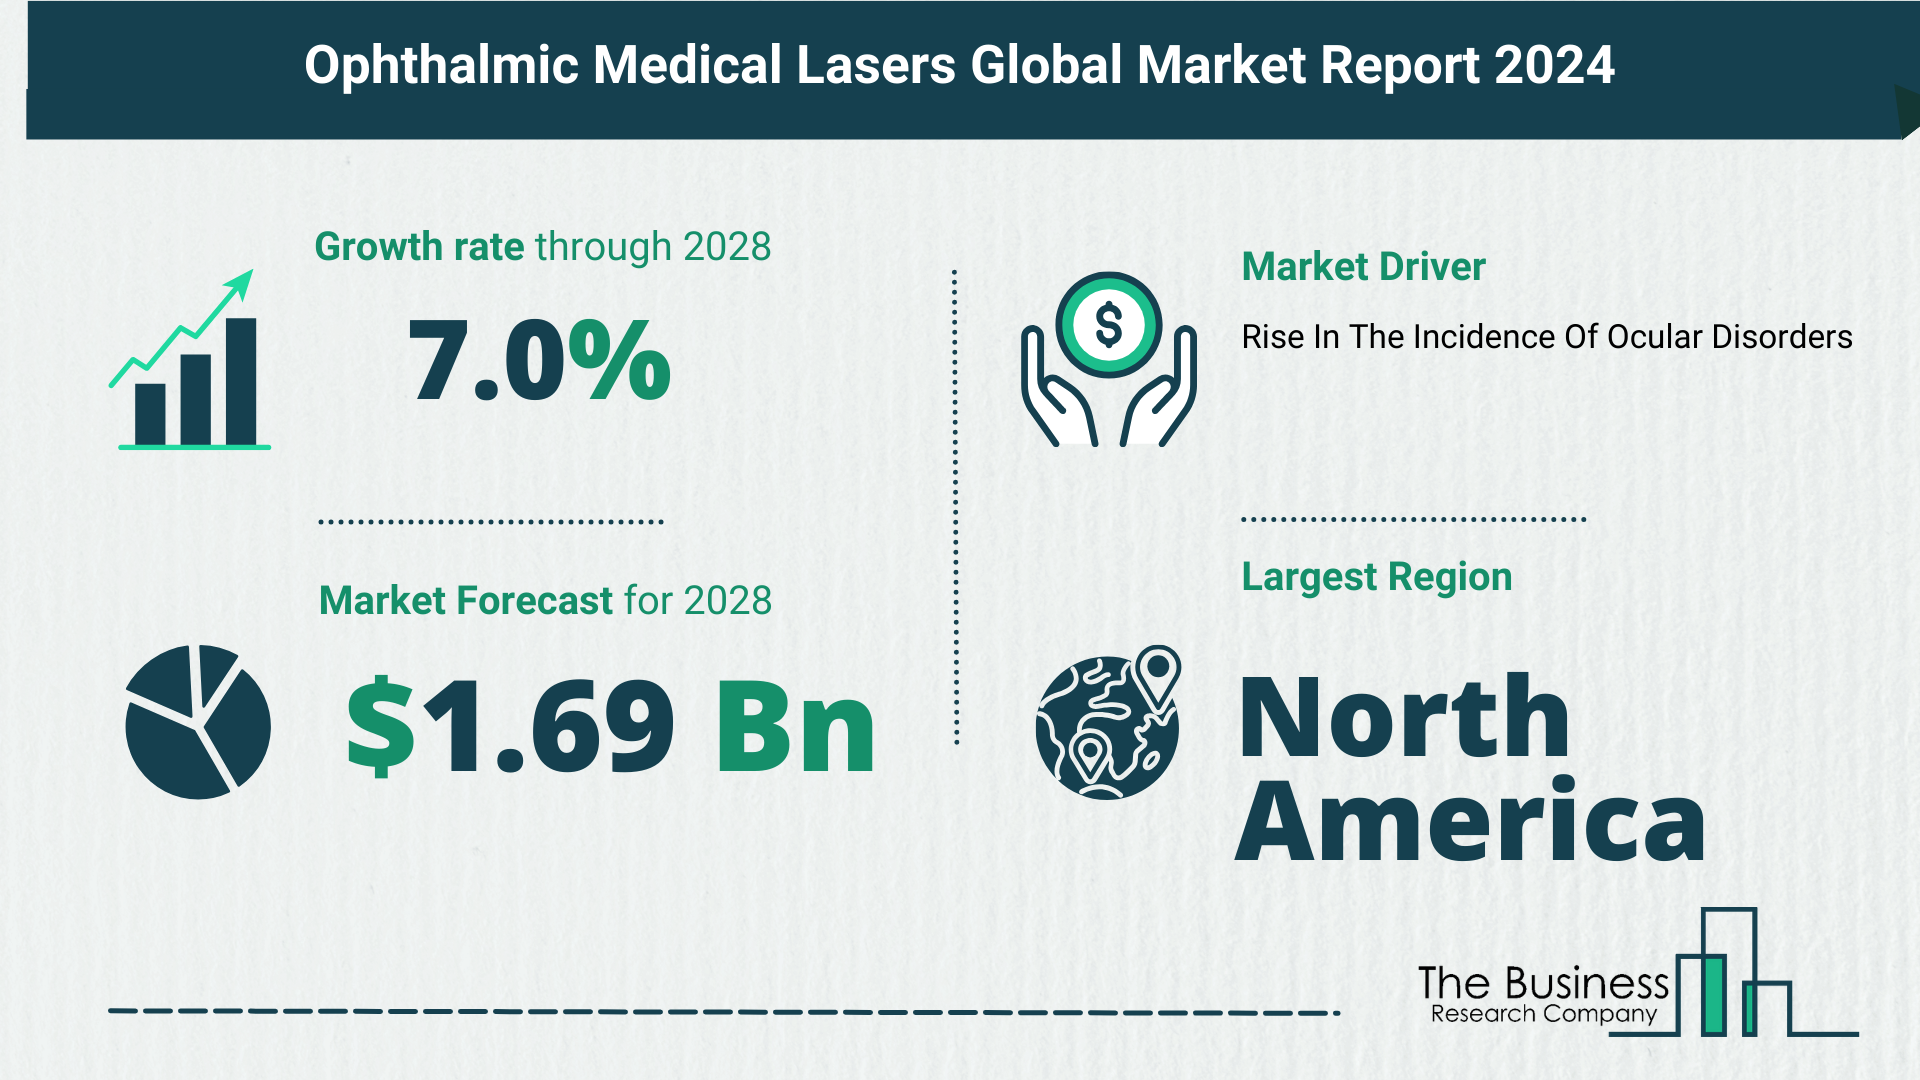 Key Trends And Drivers In The Ophthalmic Medical Lasers Market 2024